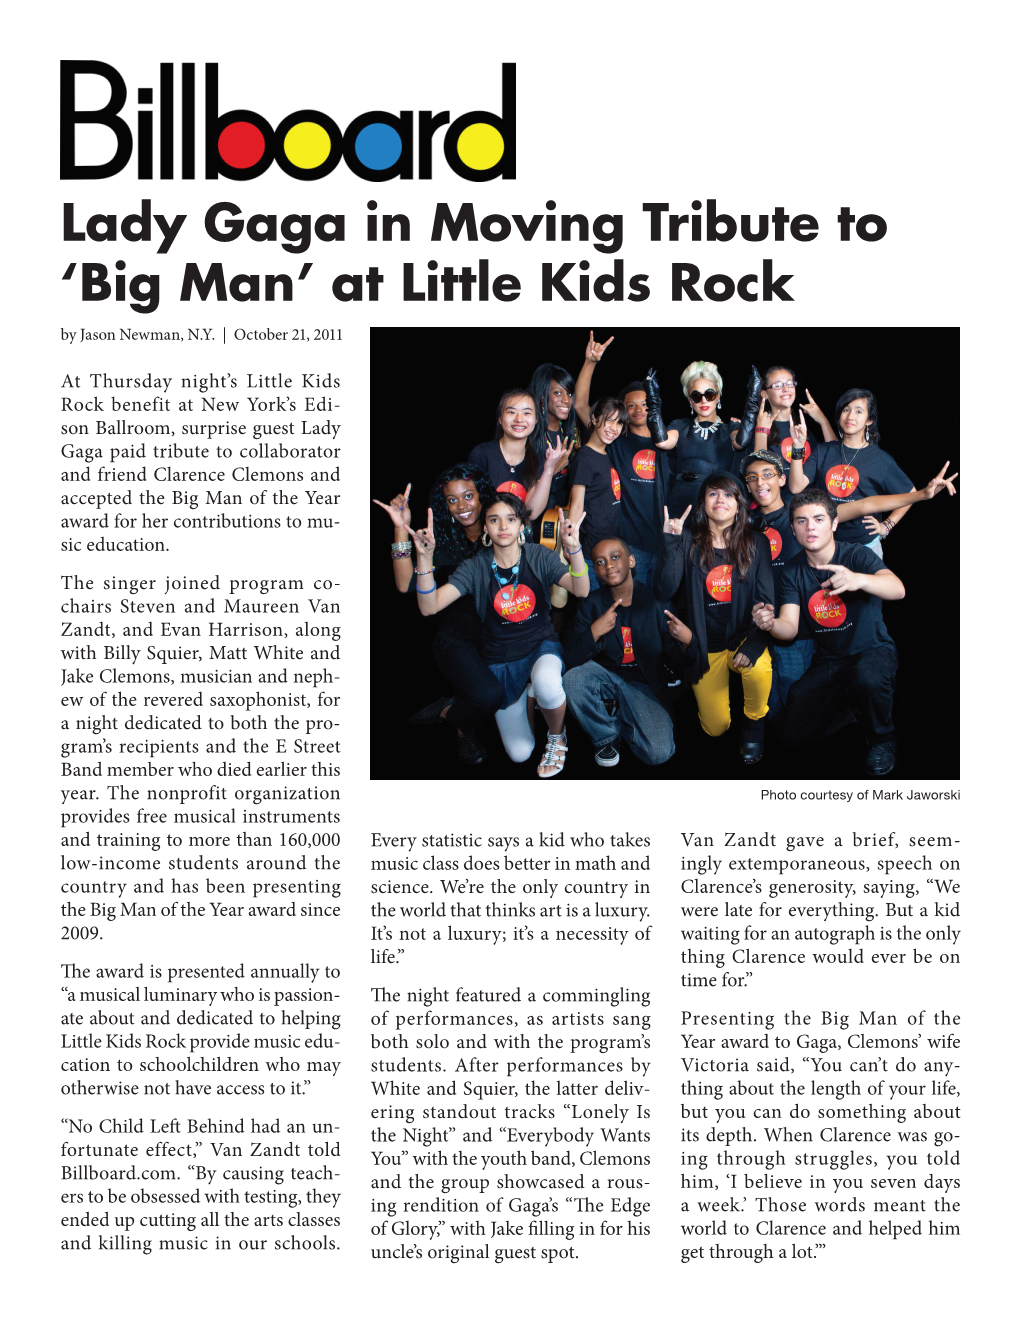 Lady Gaga in Moving Tribute to 'Big Man' at Little Kids Rock